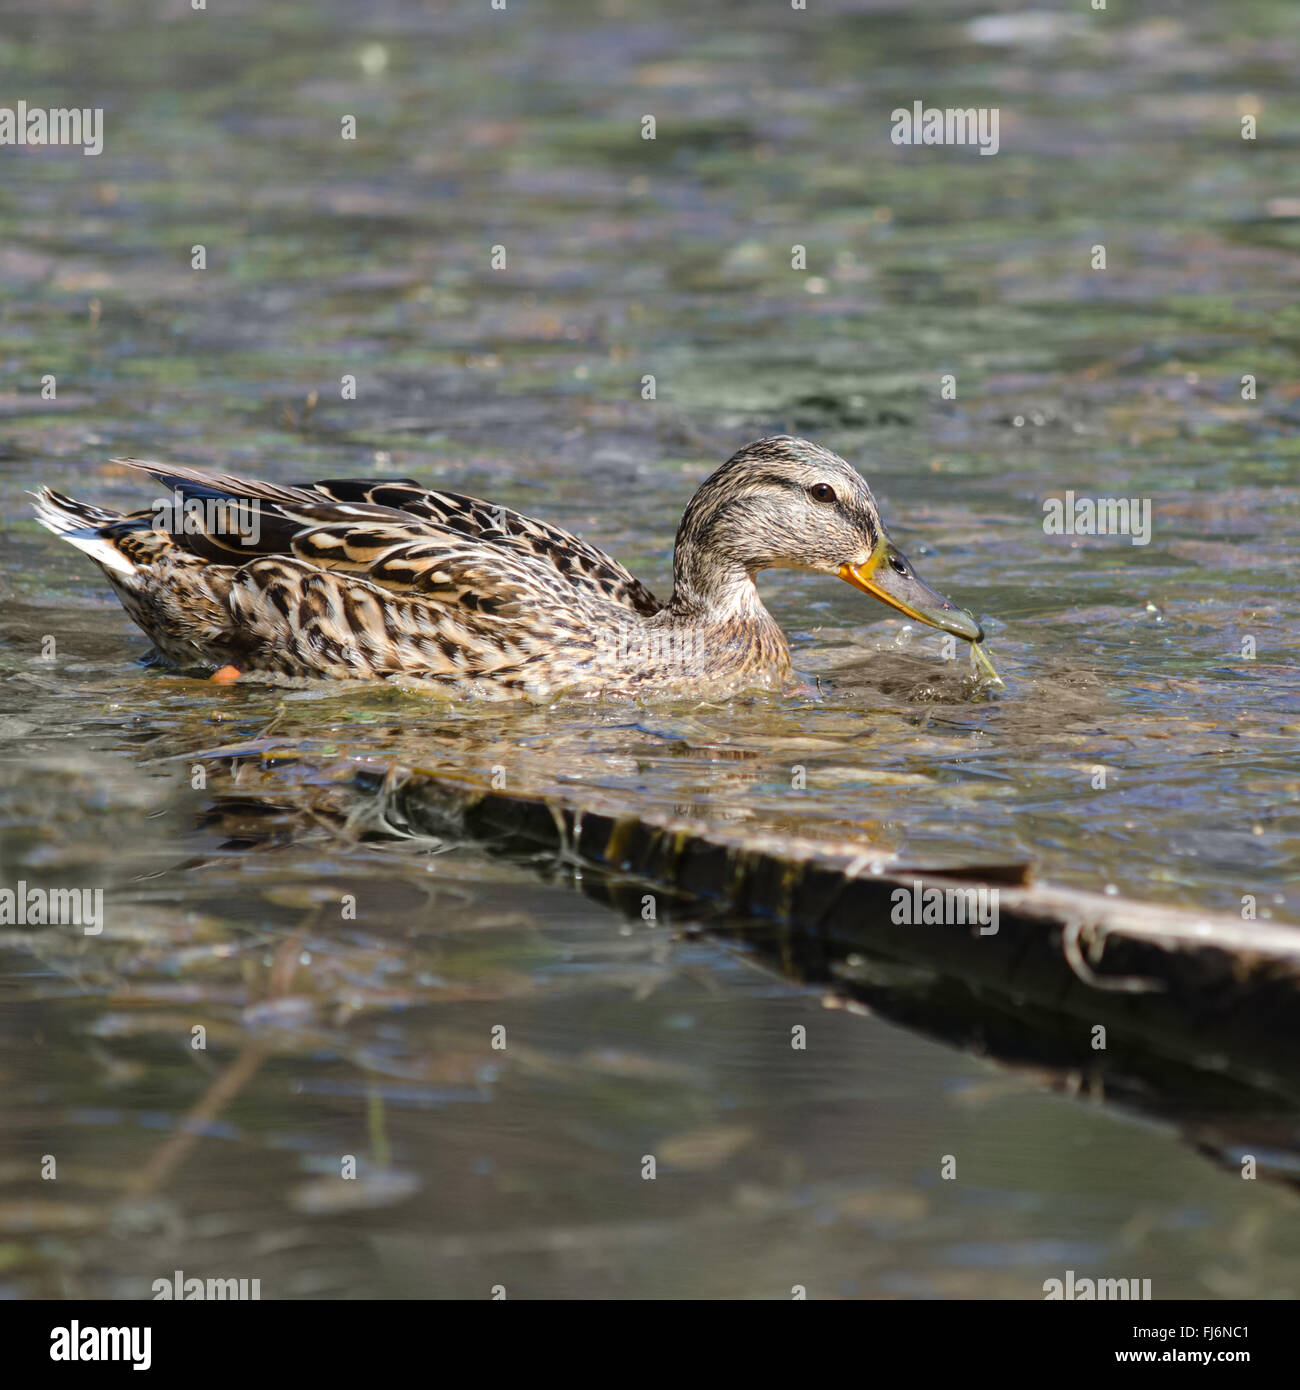 Wild duck, on the city's reservoirs. Stock Photo